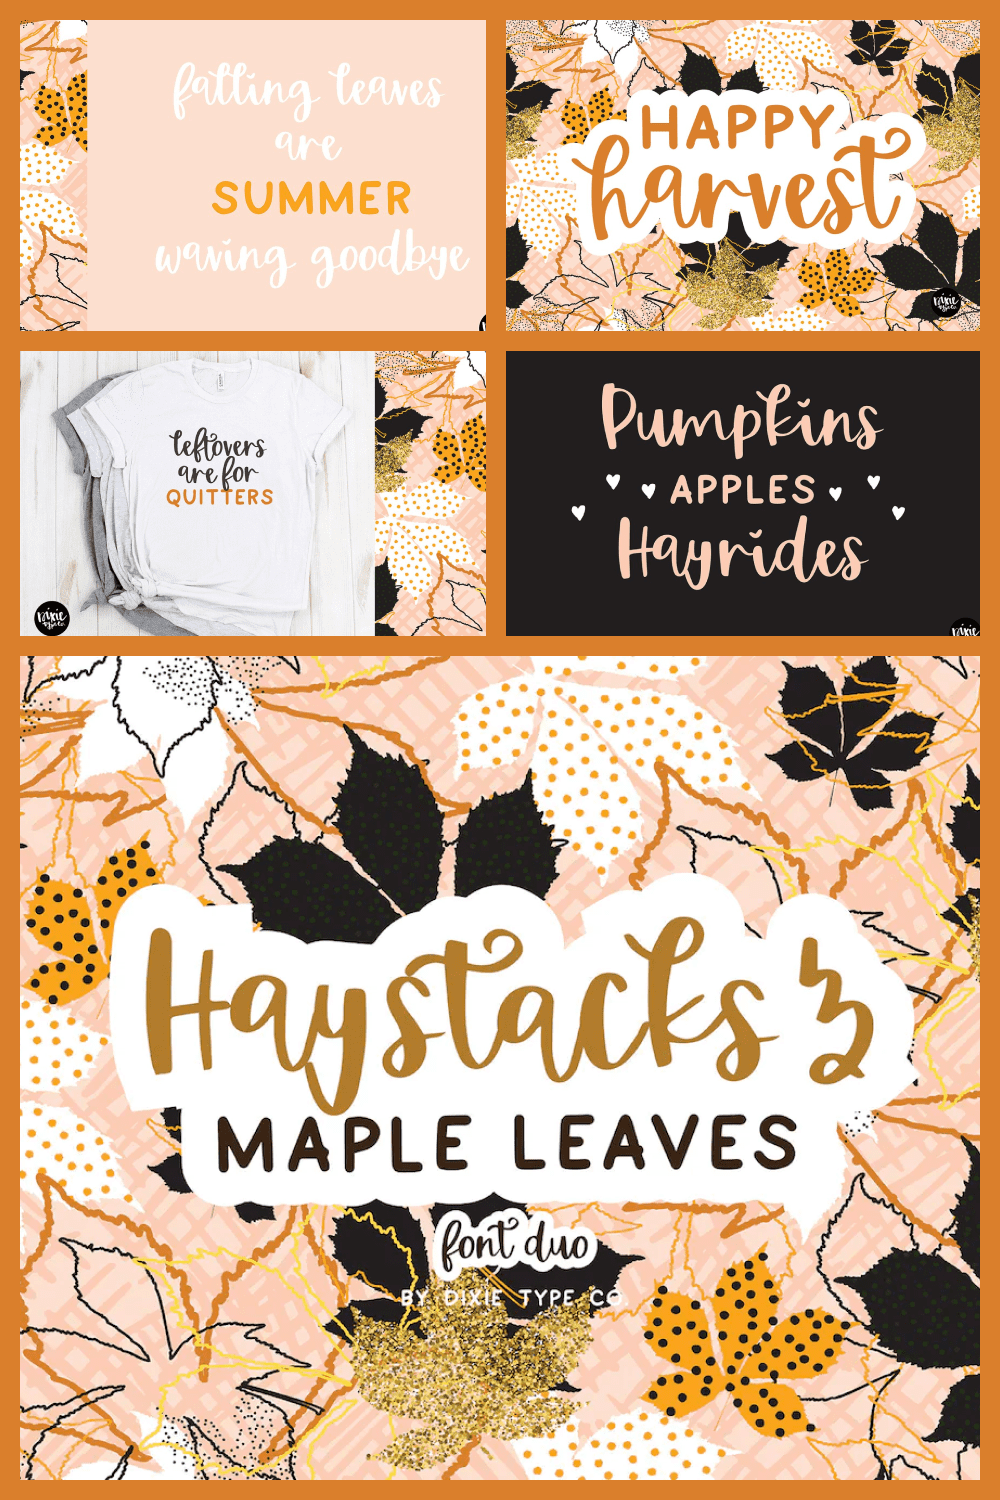 Haystacks maple leaves font duo.